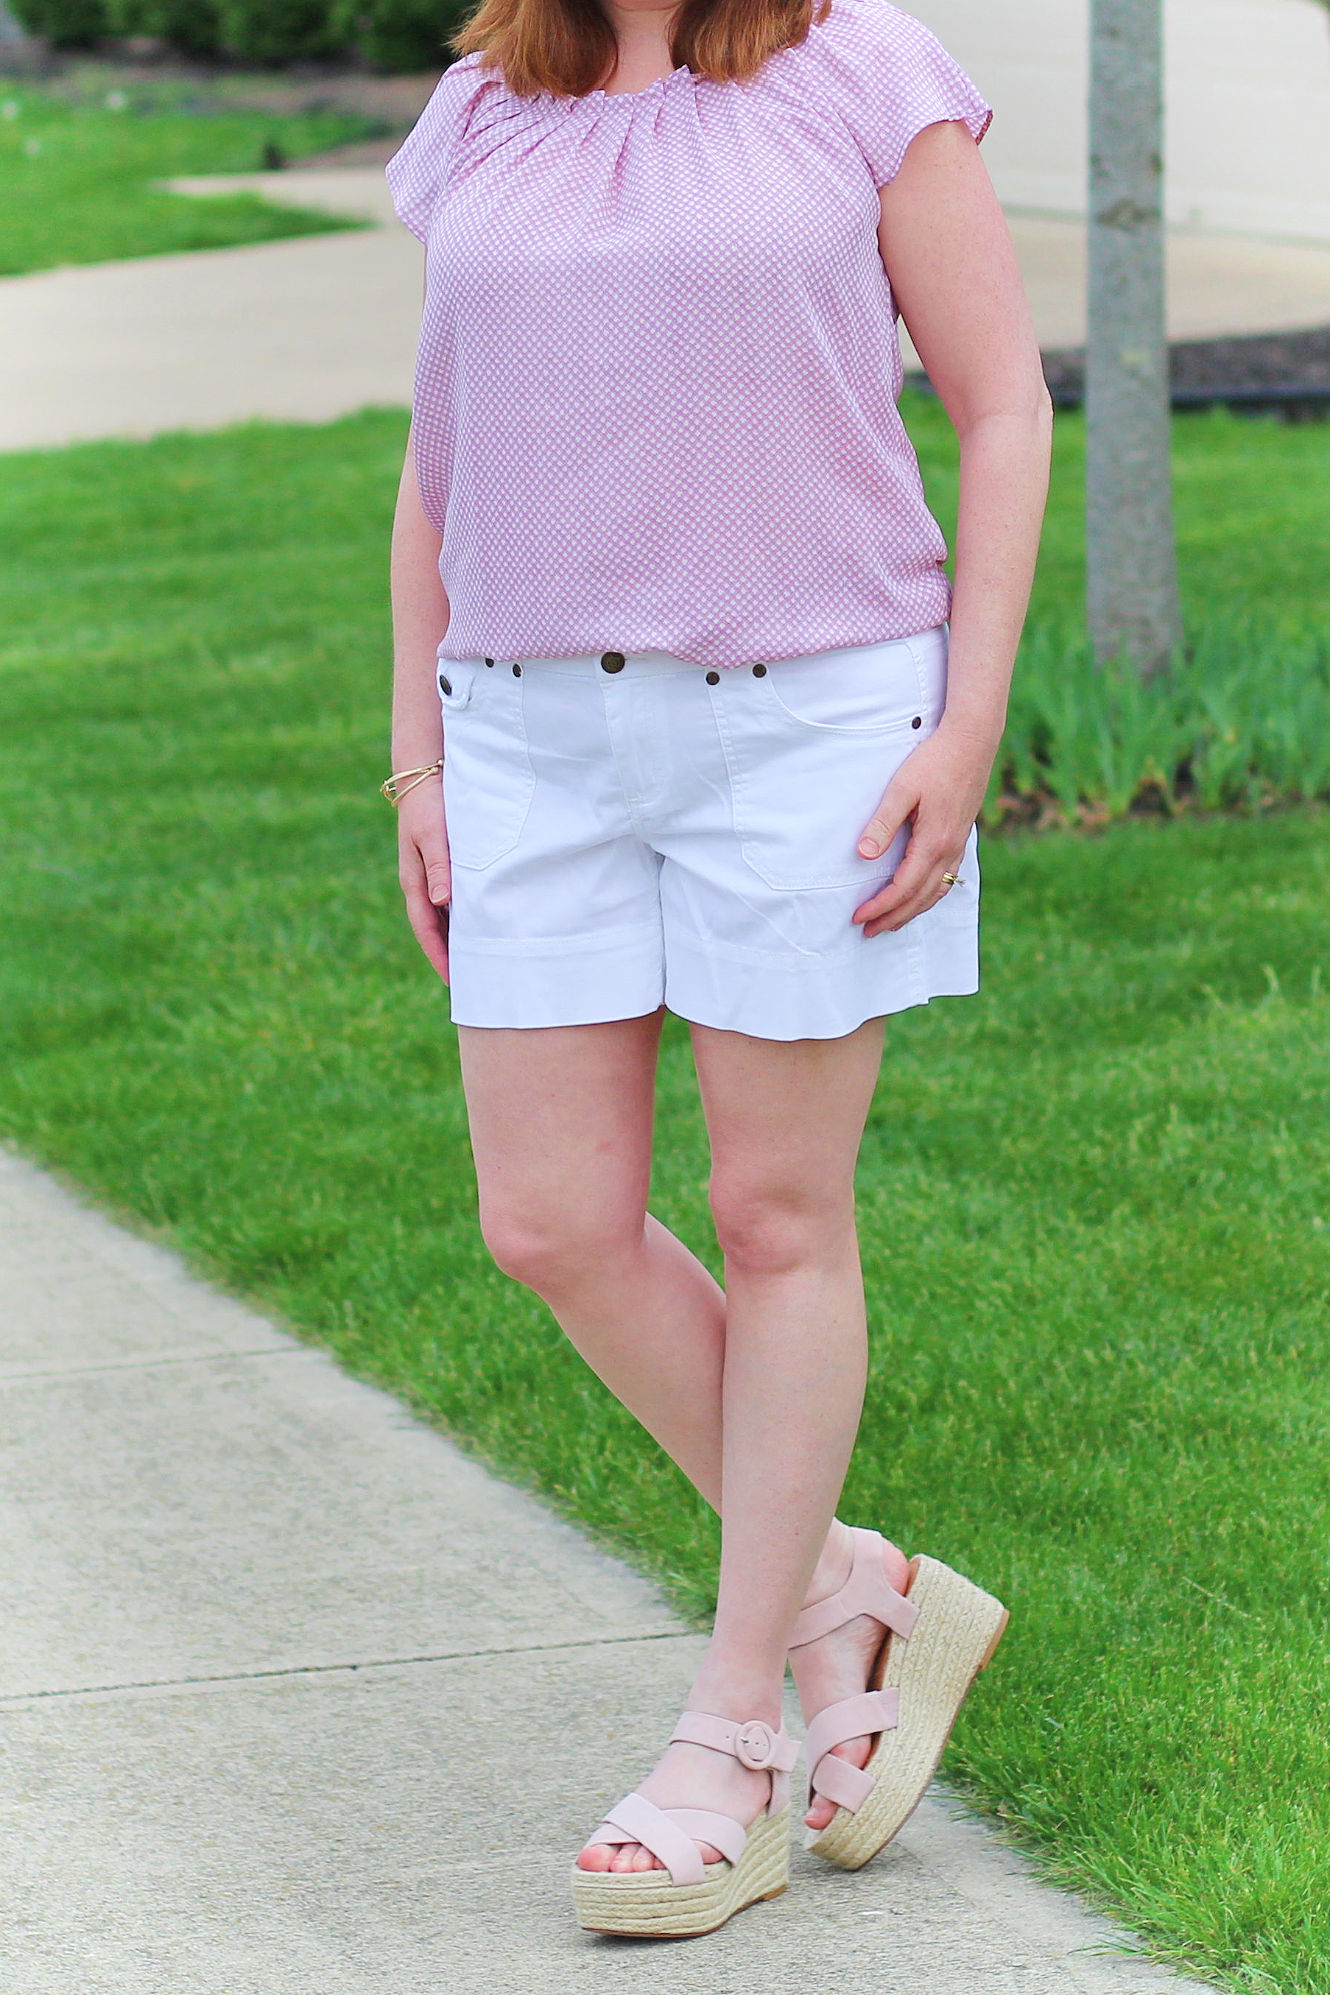 Soft Pink Gingham Top #springoutfit #pinkgingham #whiteshortsoutfit #summerstyle #blushsandals